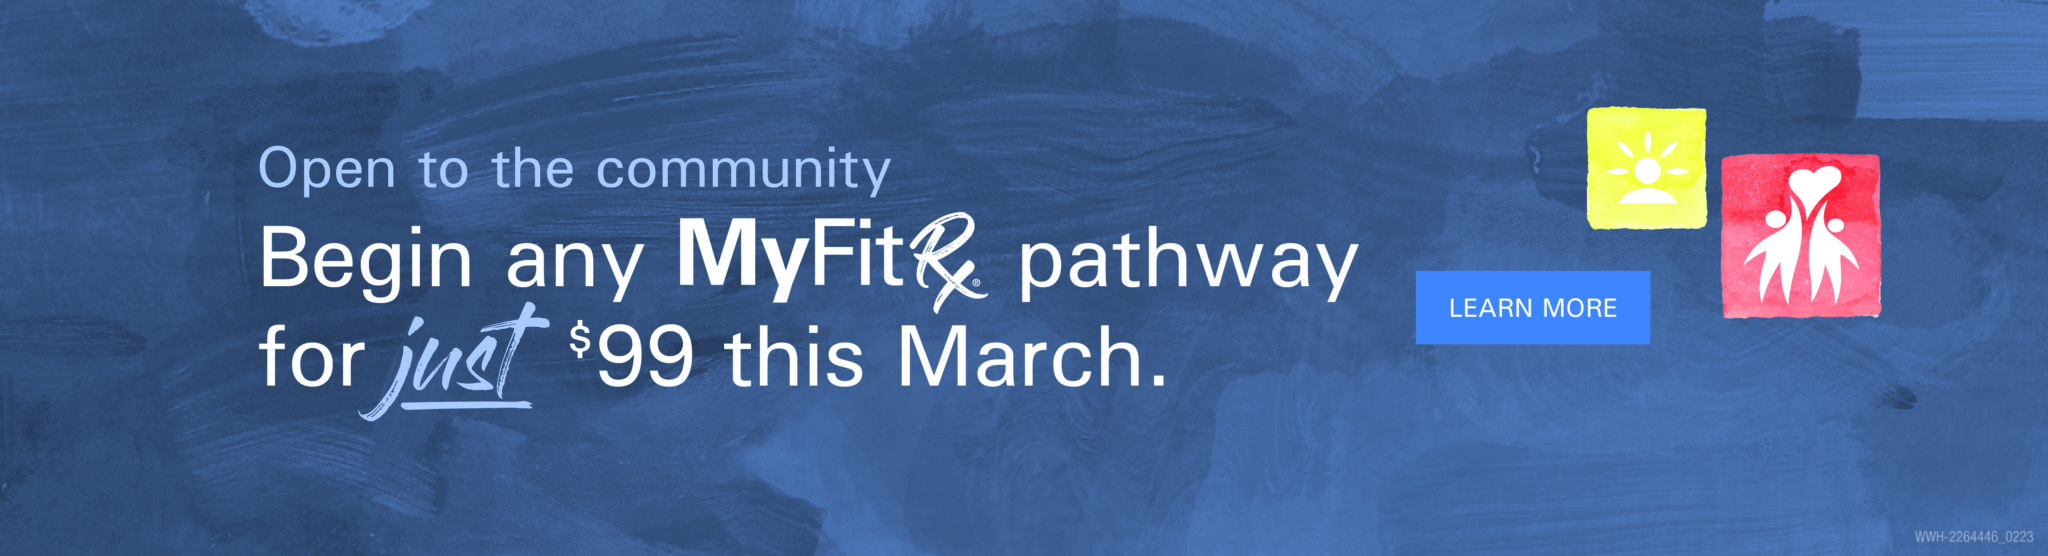 Begin any MyFitRx® pathway for just $99 this March.